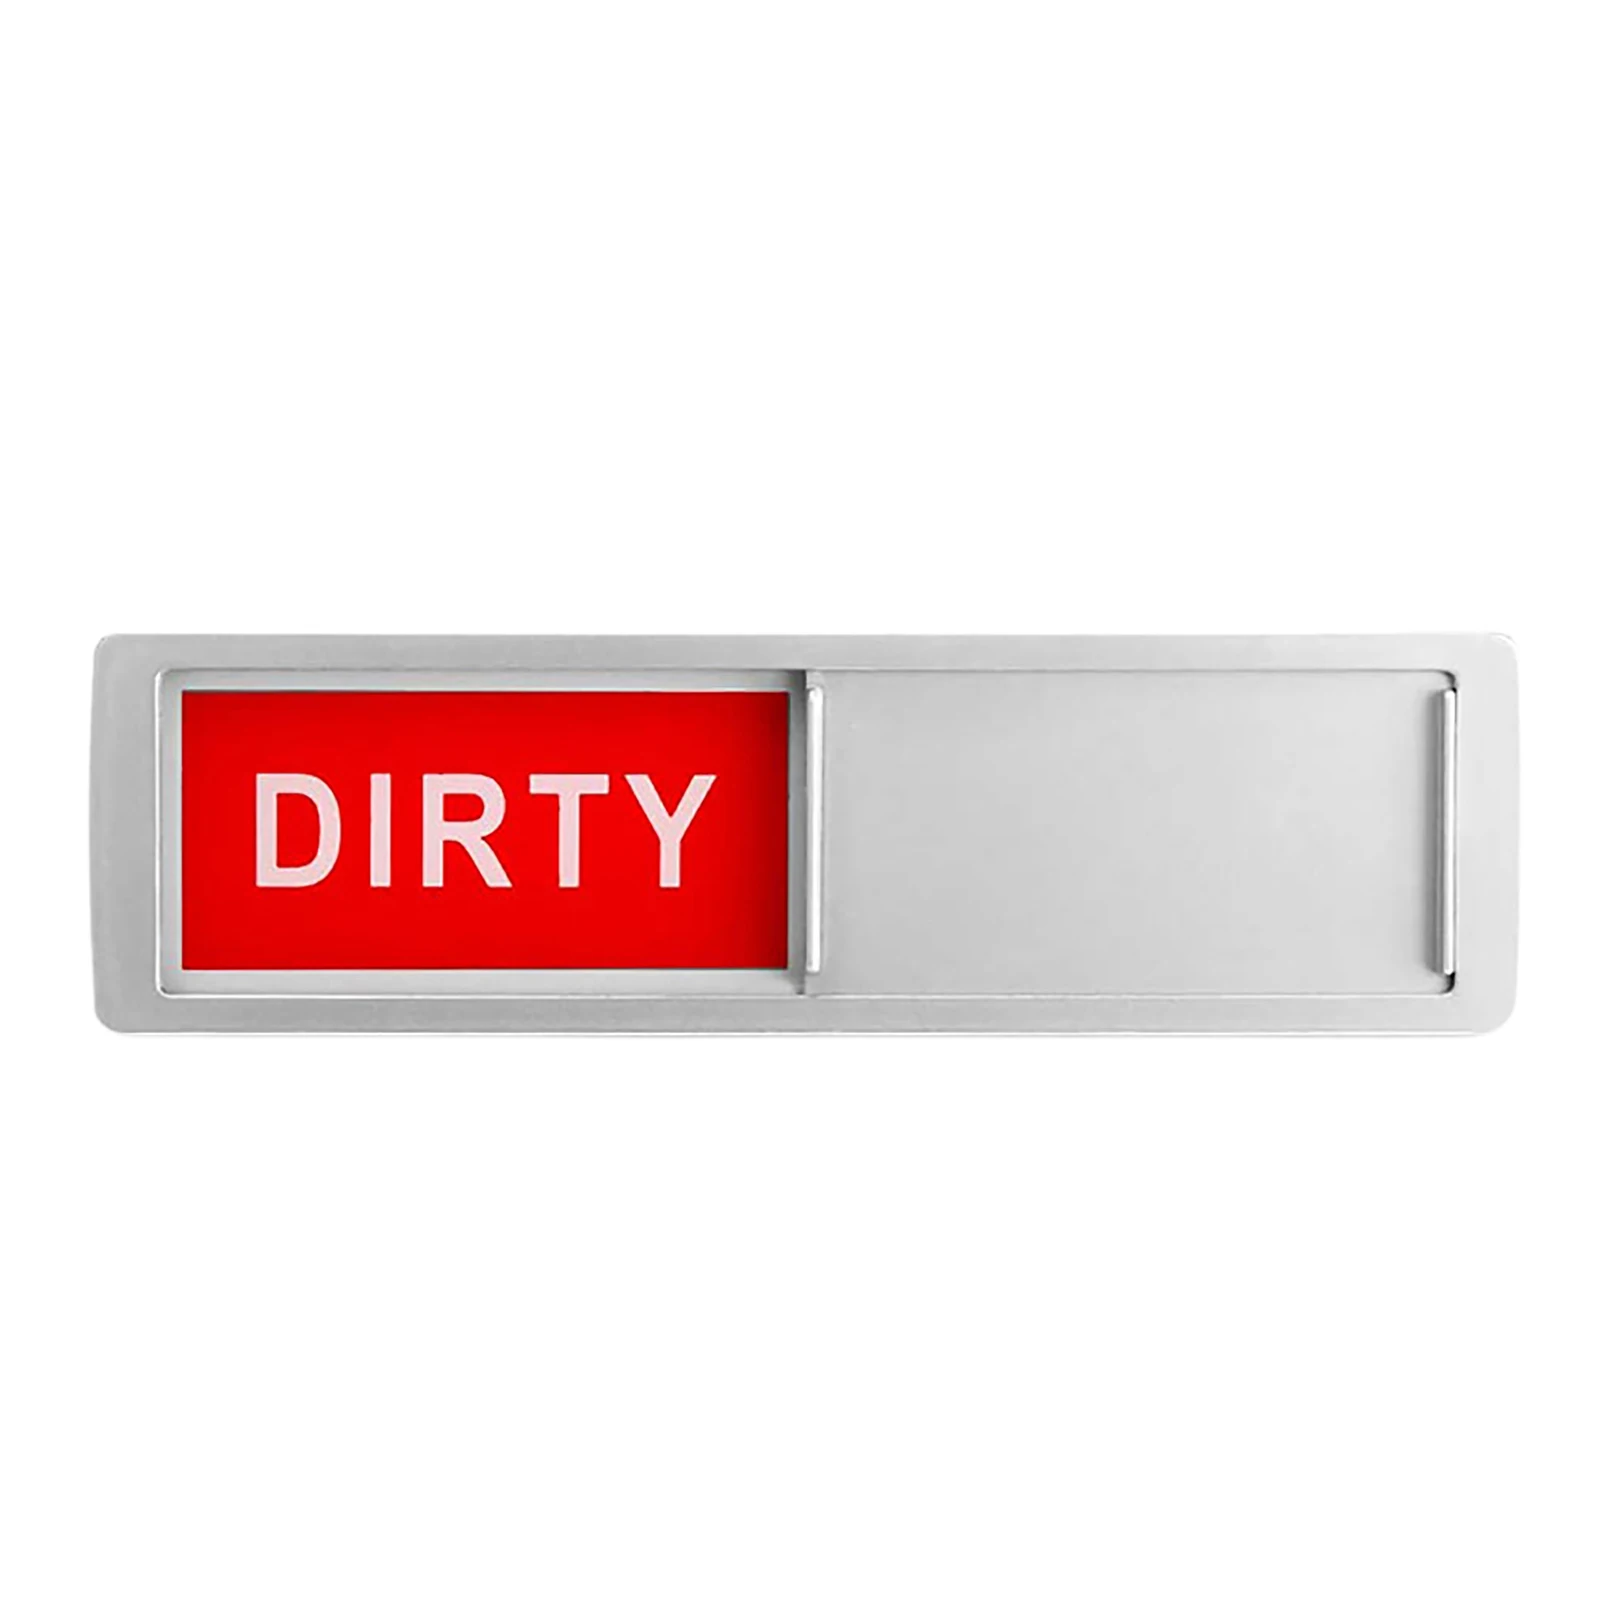 

Dishwasher Magnet Clean Dirty Sign Adhesive Sticker For All Surfaces Strong Magnet Sign For Kitchen Dish Washer Refrigerator